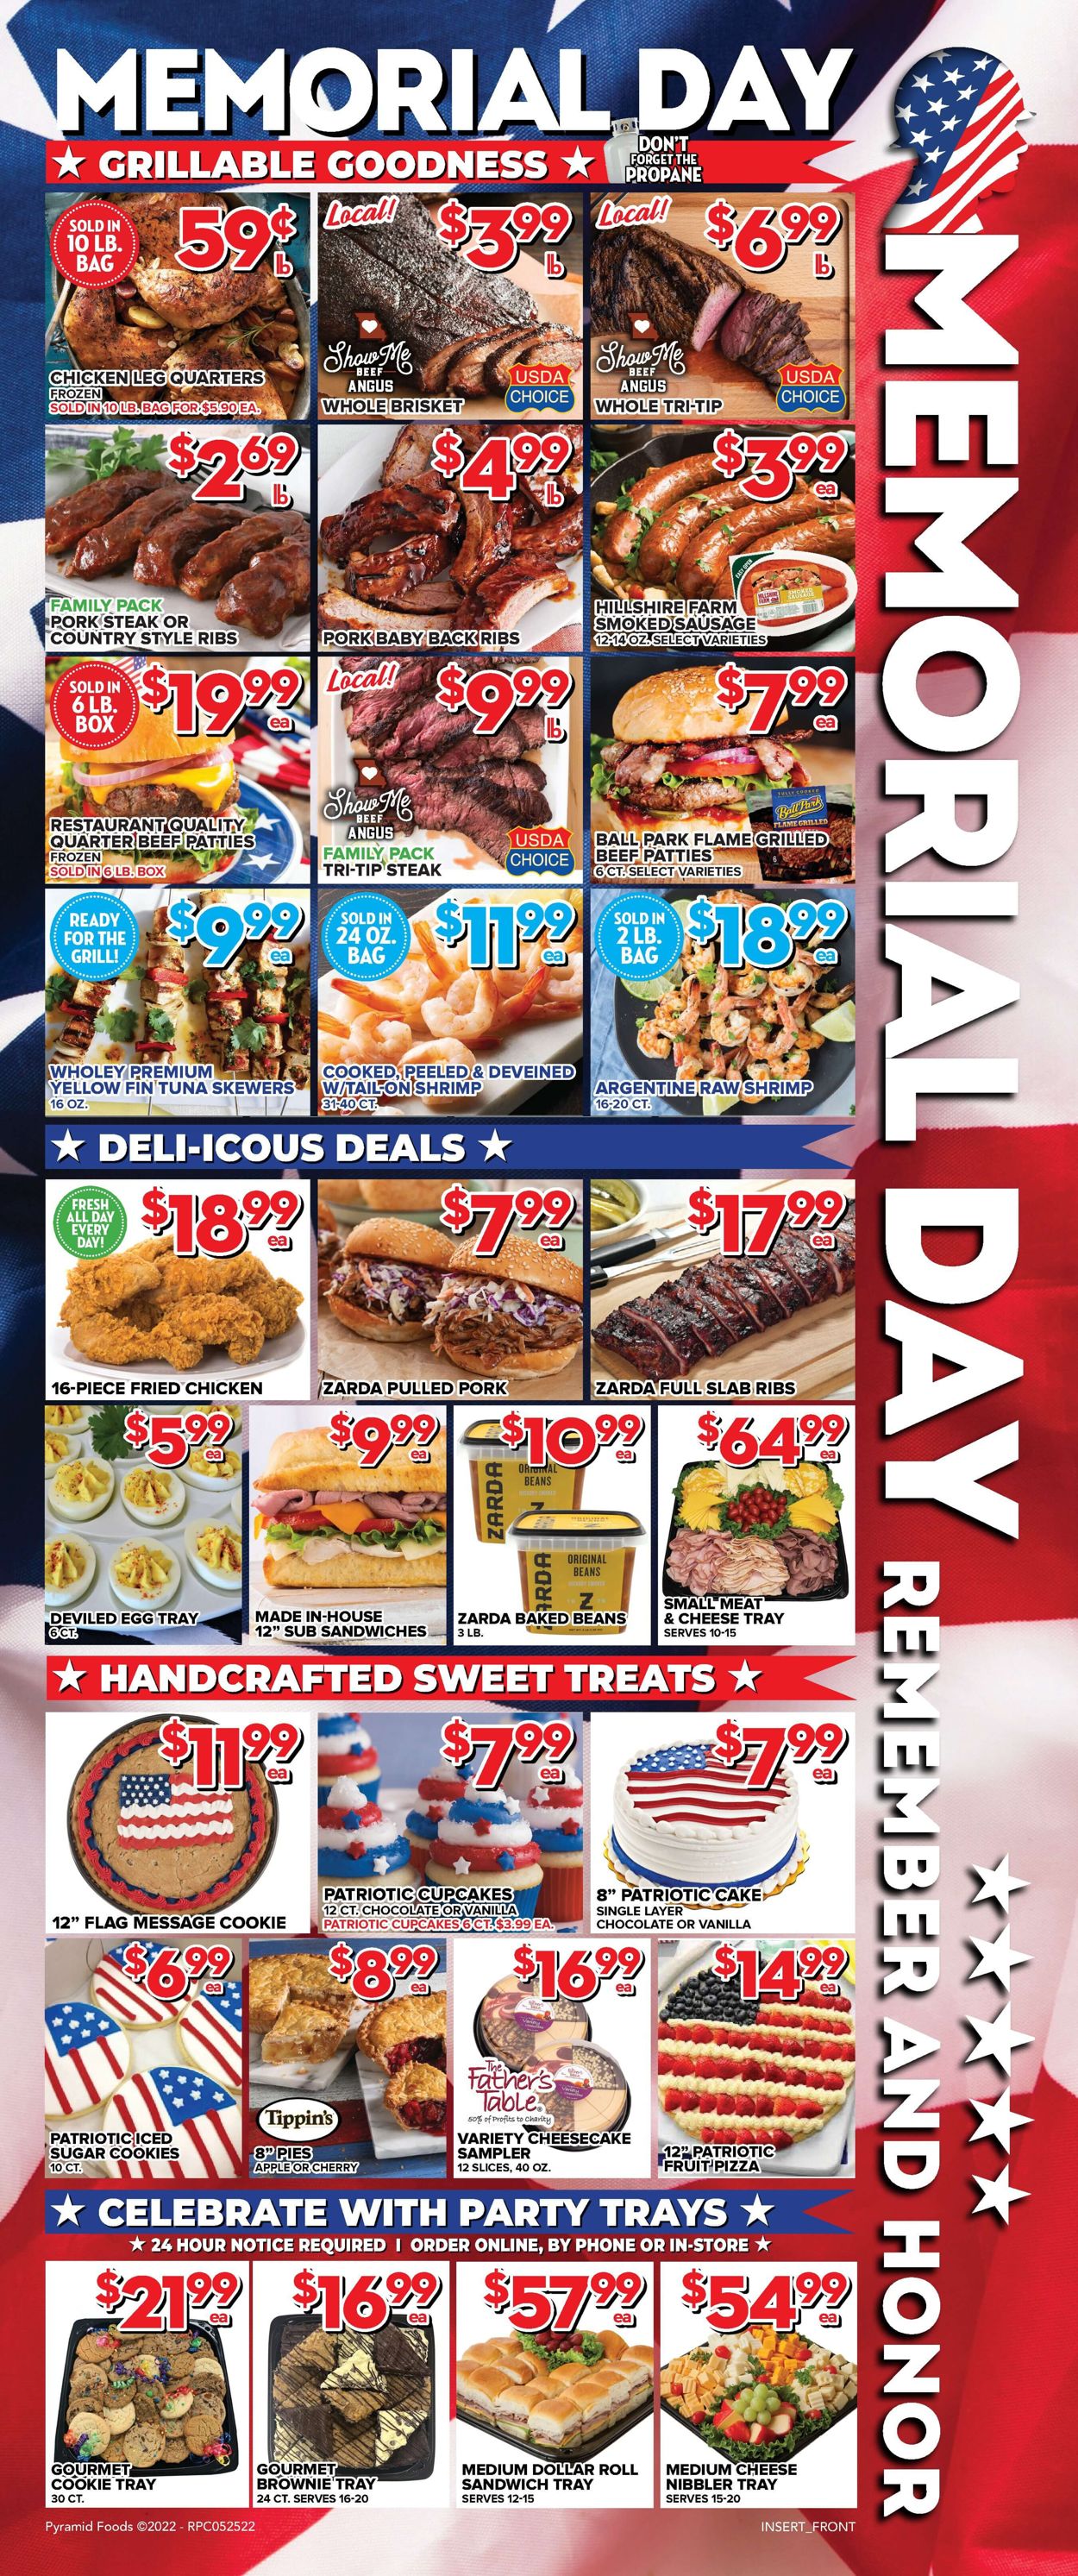 Price Cutter Weekly Ad Circular - valid 05/25-05/31/2022 (Page 3)